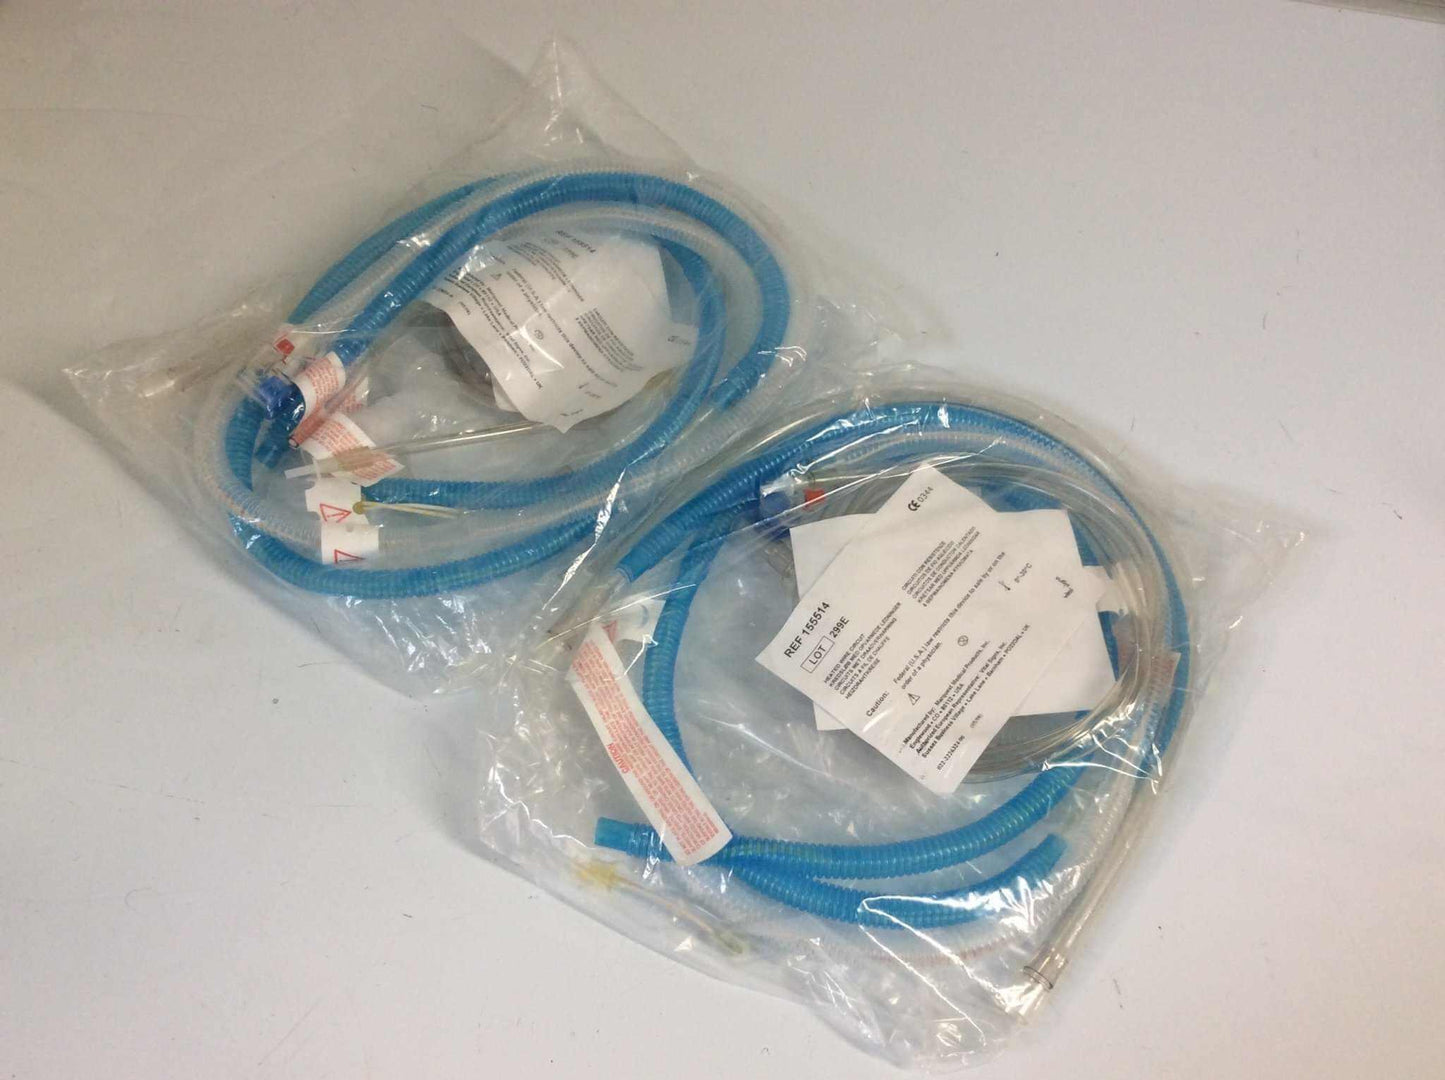 Lot of 2 NEW Marquest Medical Products Pediatric Heated Wire Circuit 155514 - MBR Medicals